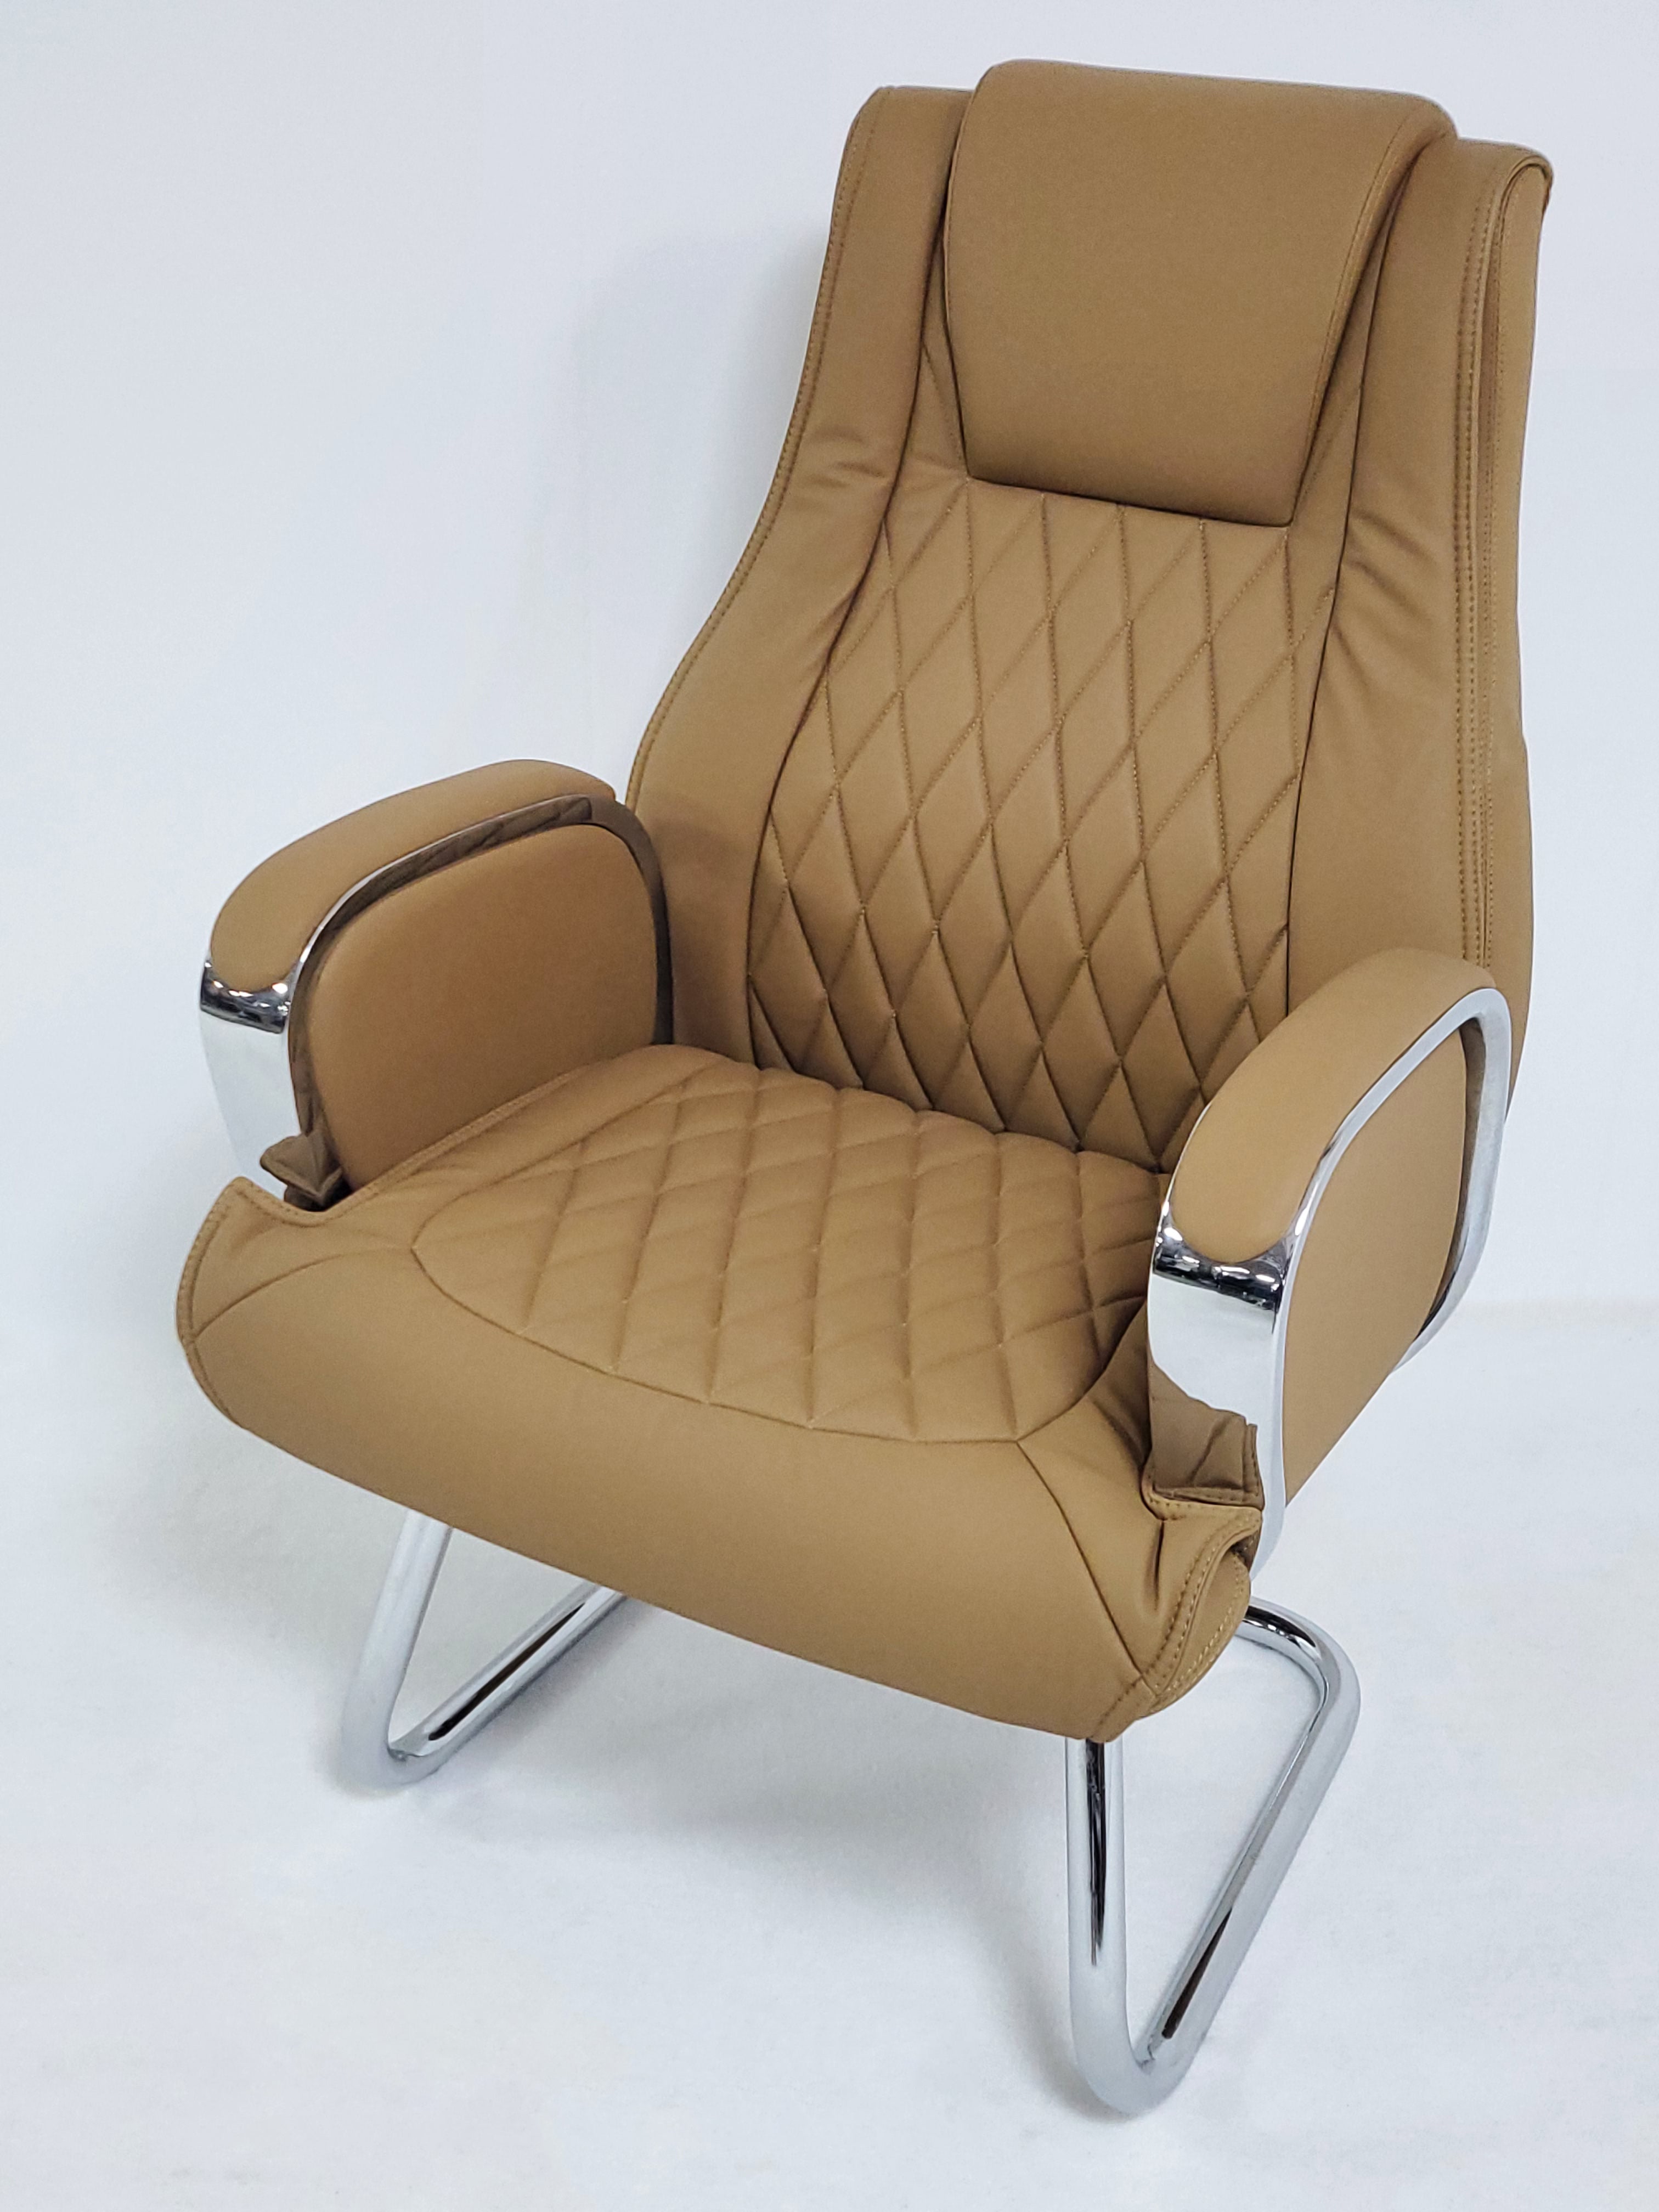 Heavy Duty Modern Beige Leather Visitor Chair with Chrome Arms - CHA-1202C Huddersfield